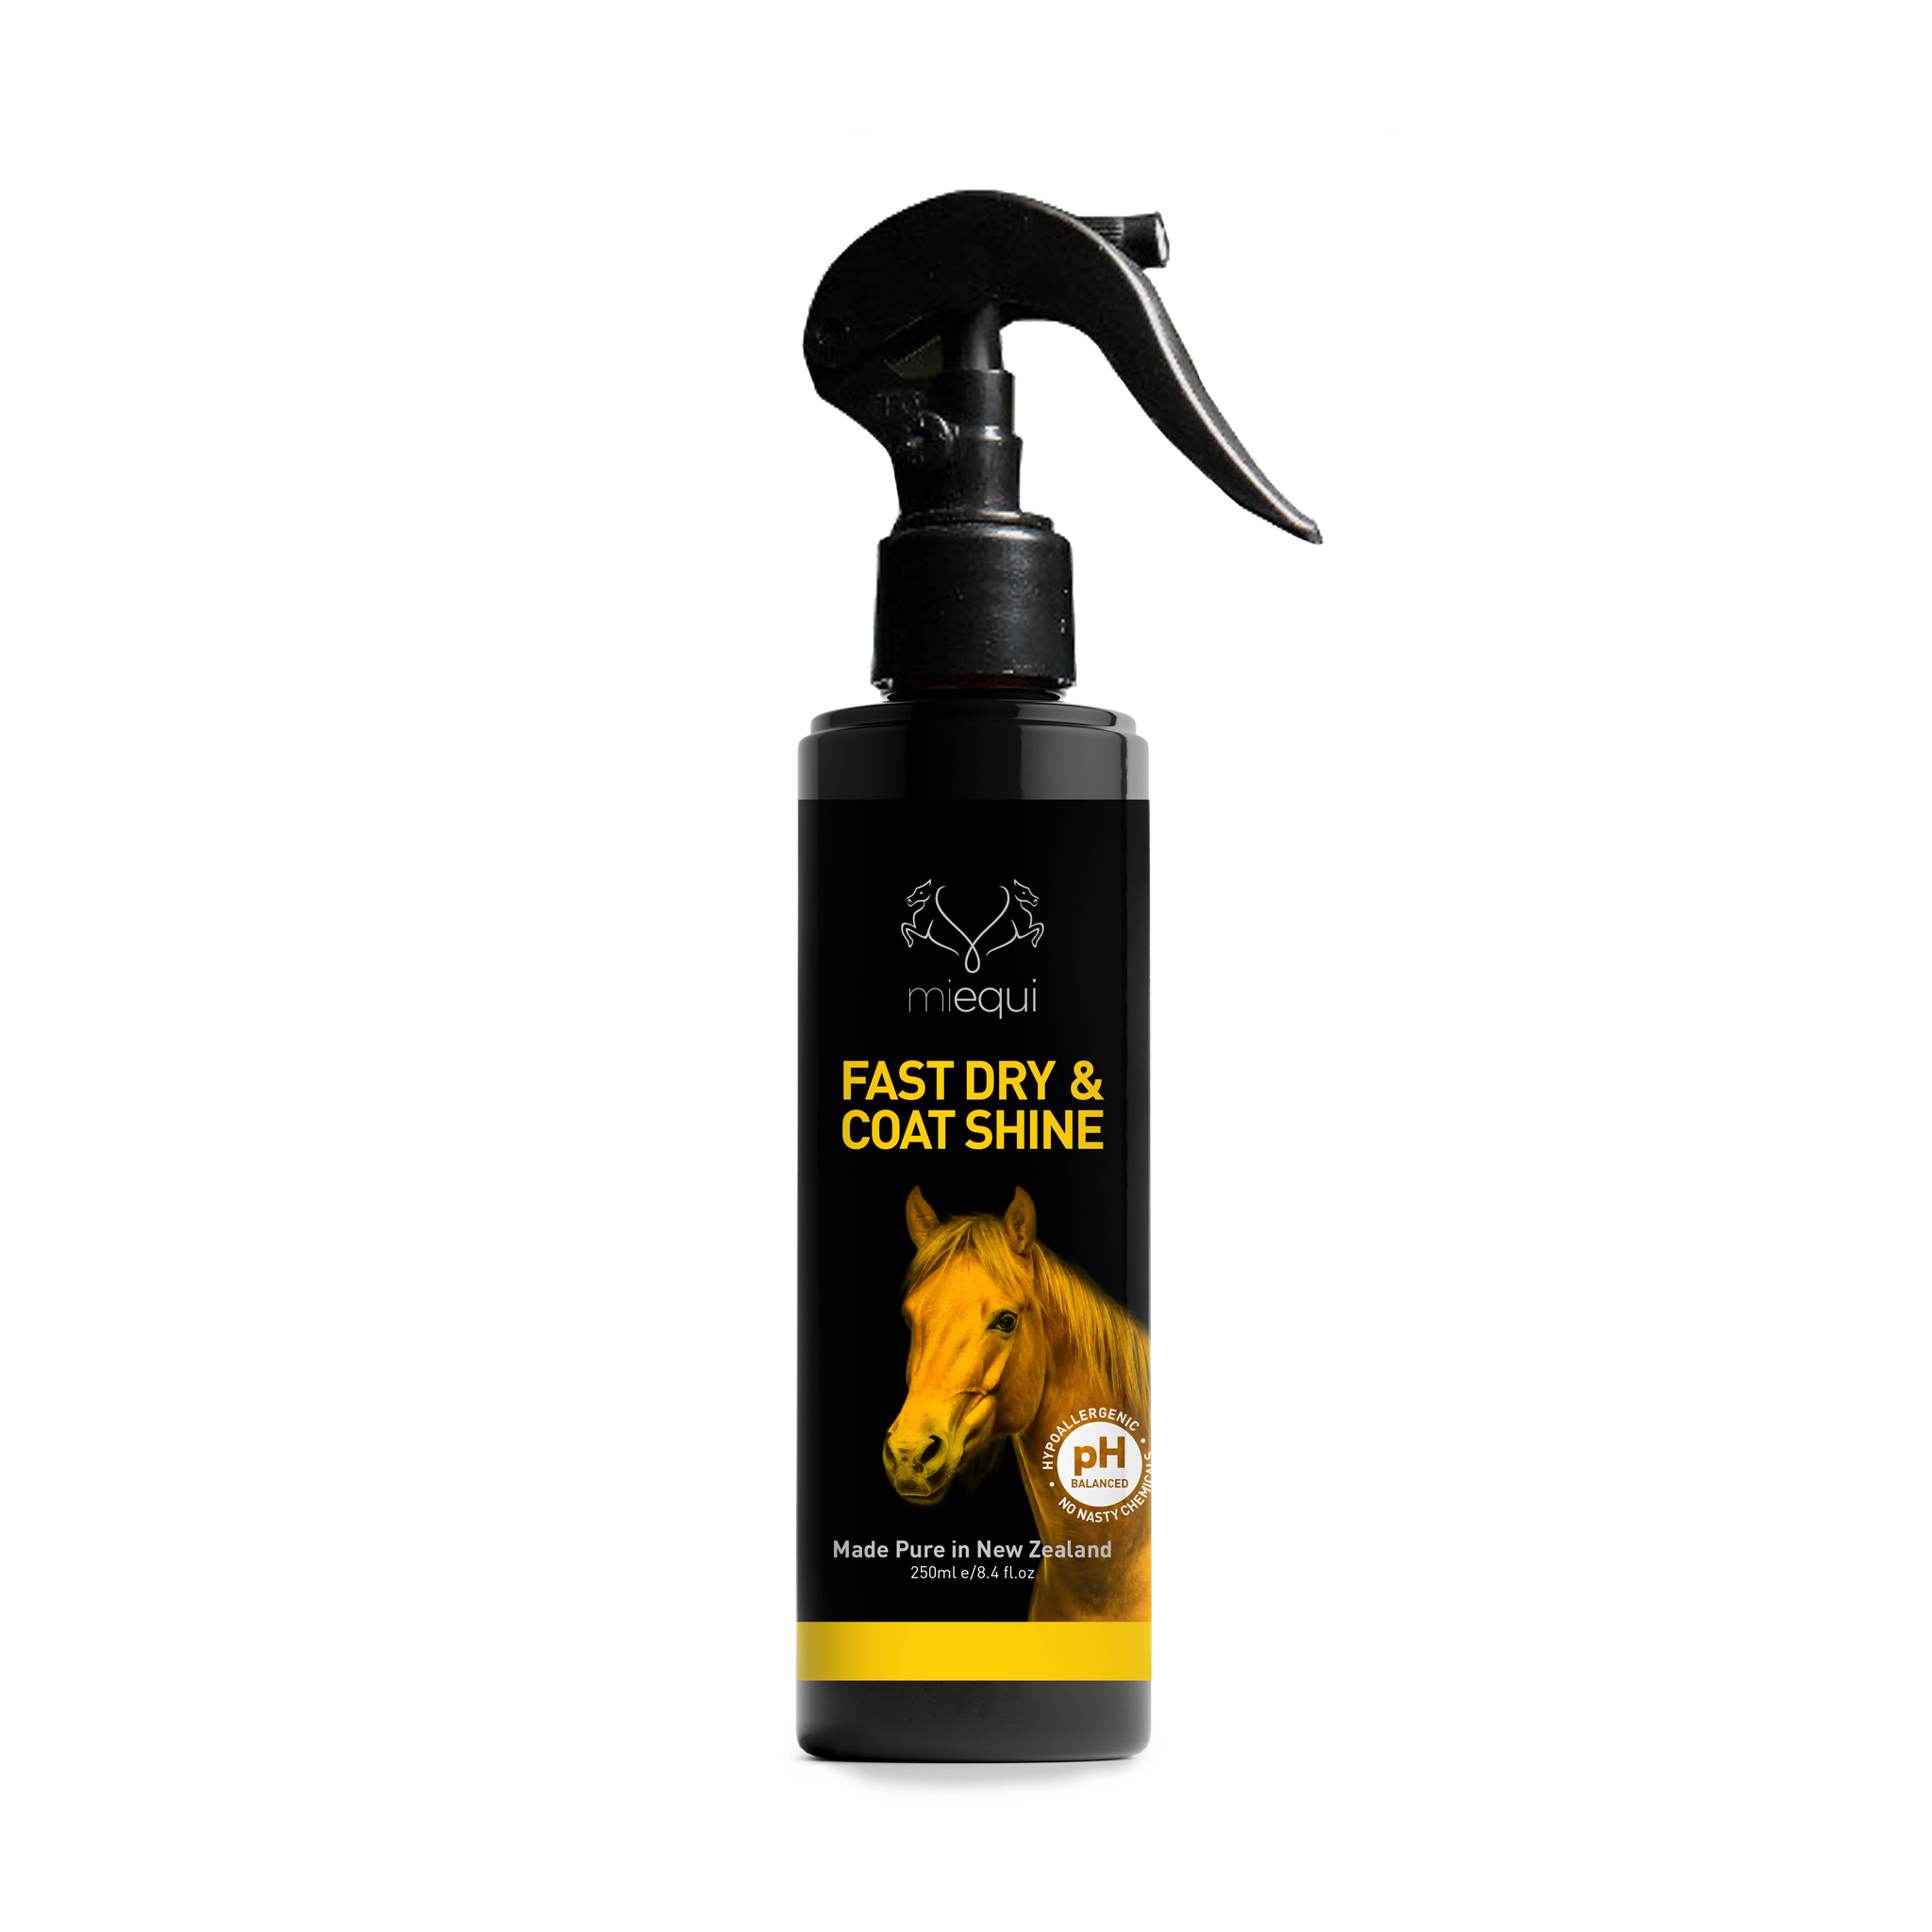 MiEqui Fast Dry & Coat Shine - Dry Your Horse Up To 60% Faster!